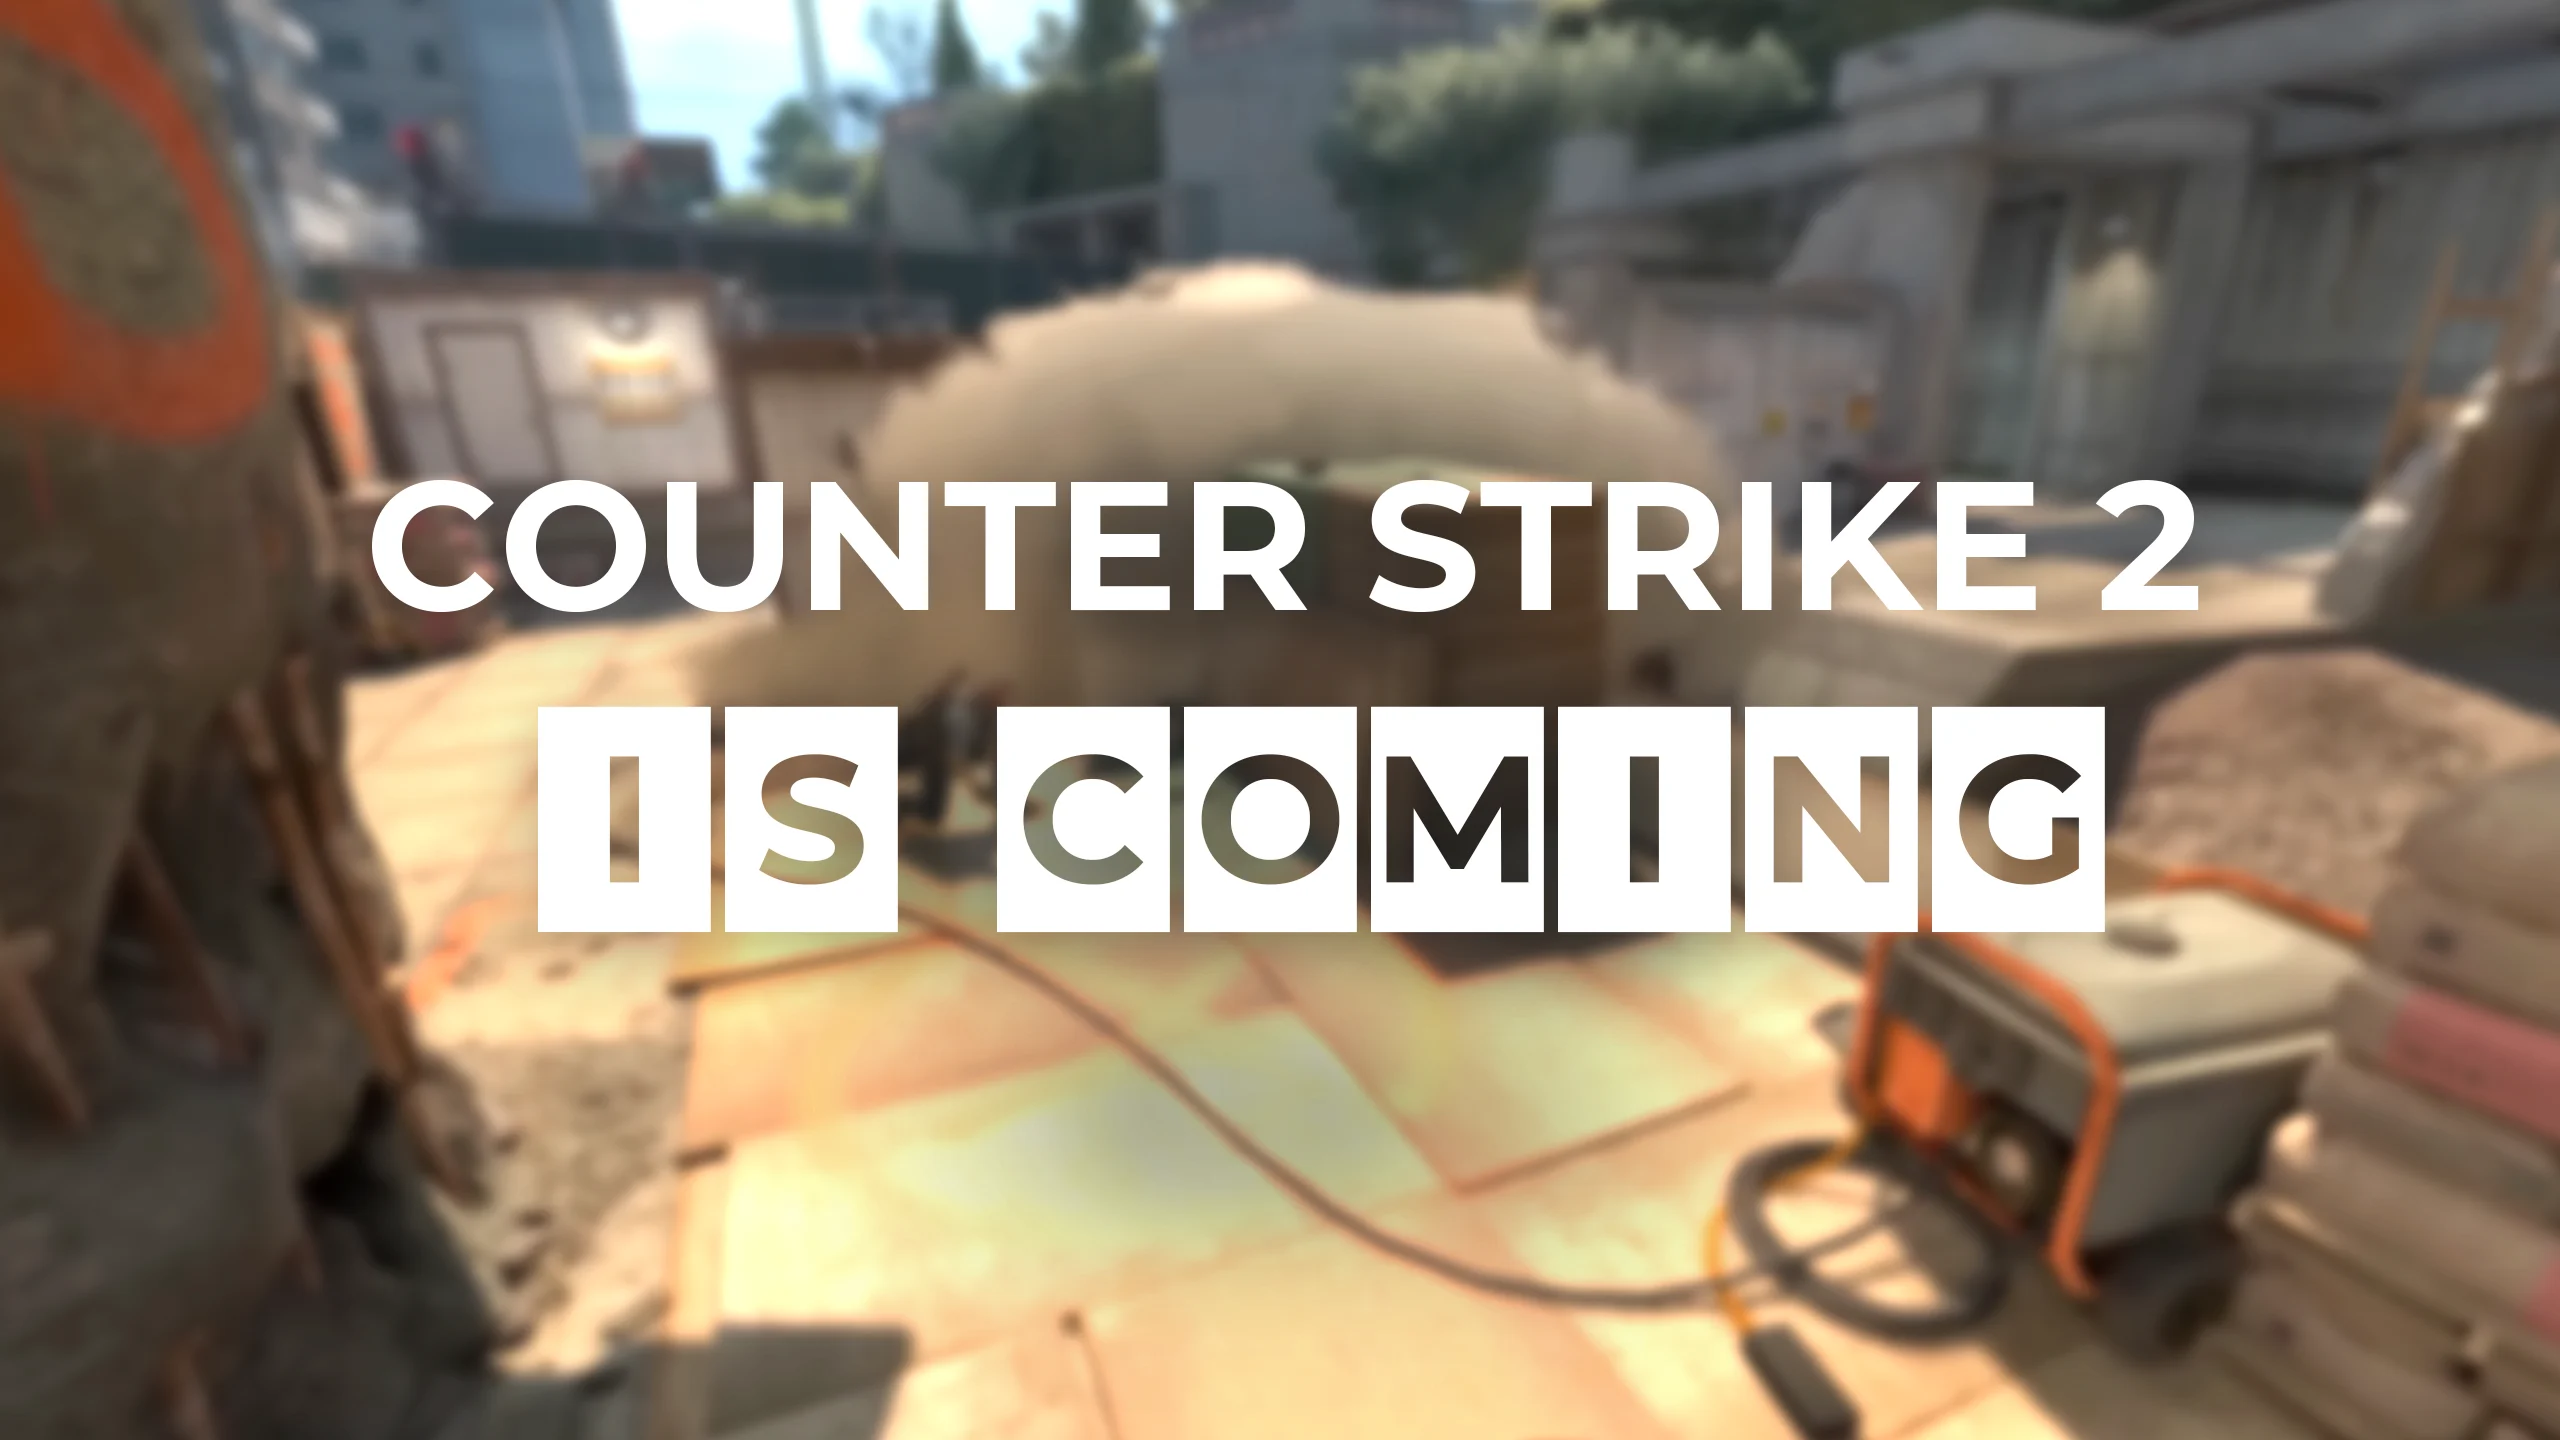 Counter-Strike 2 is coming!